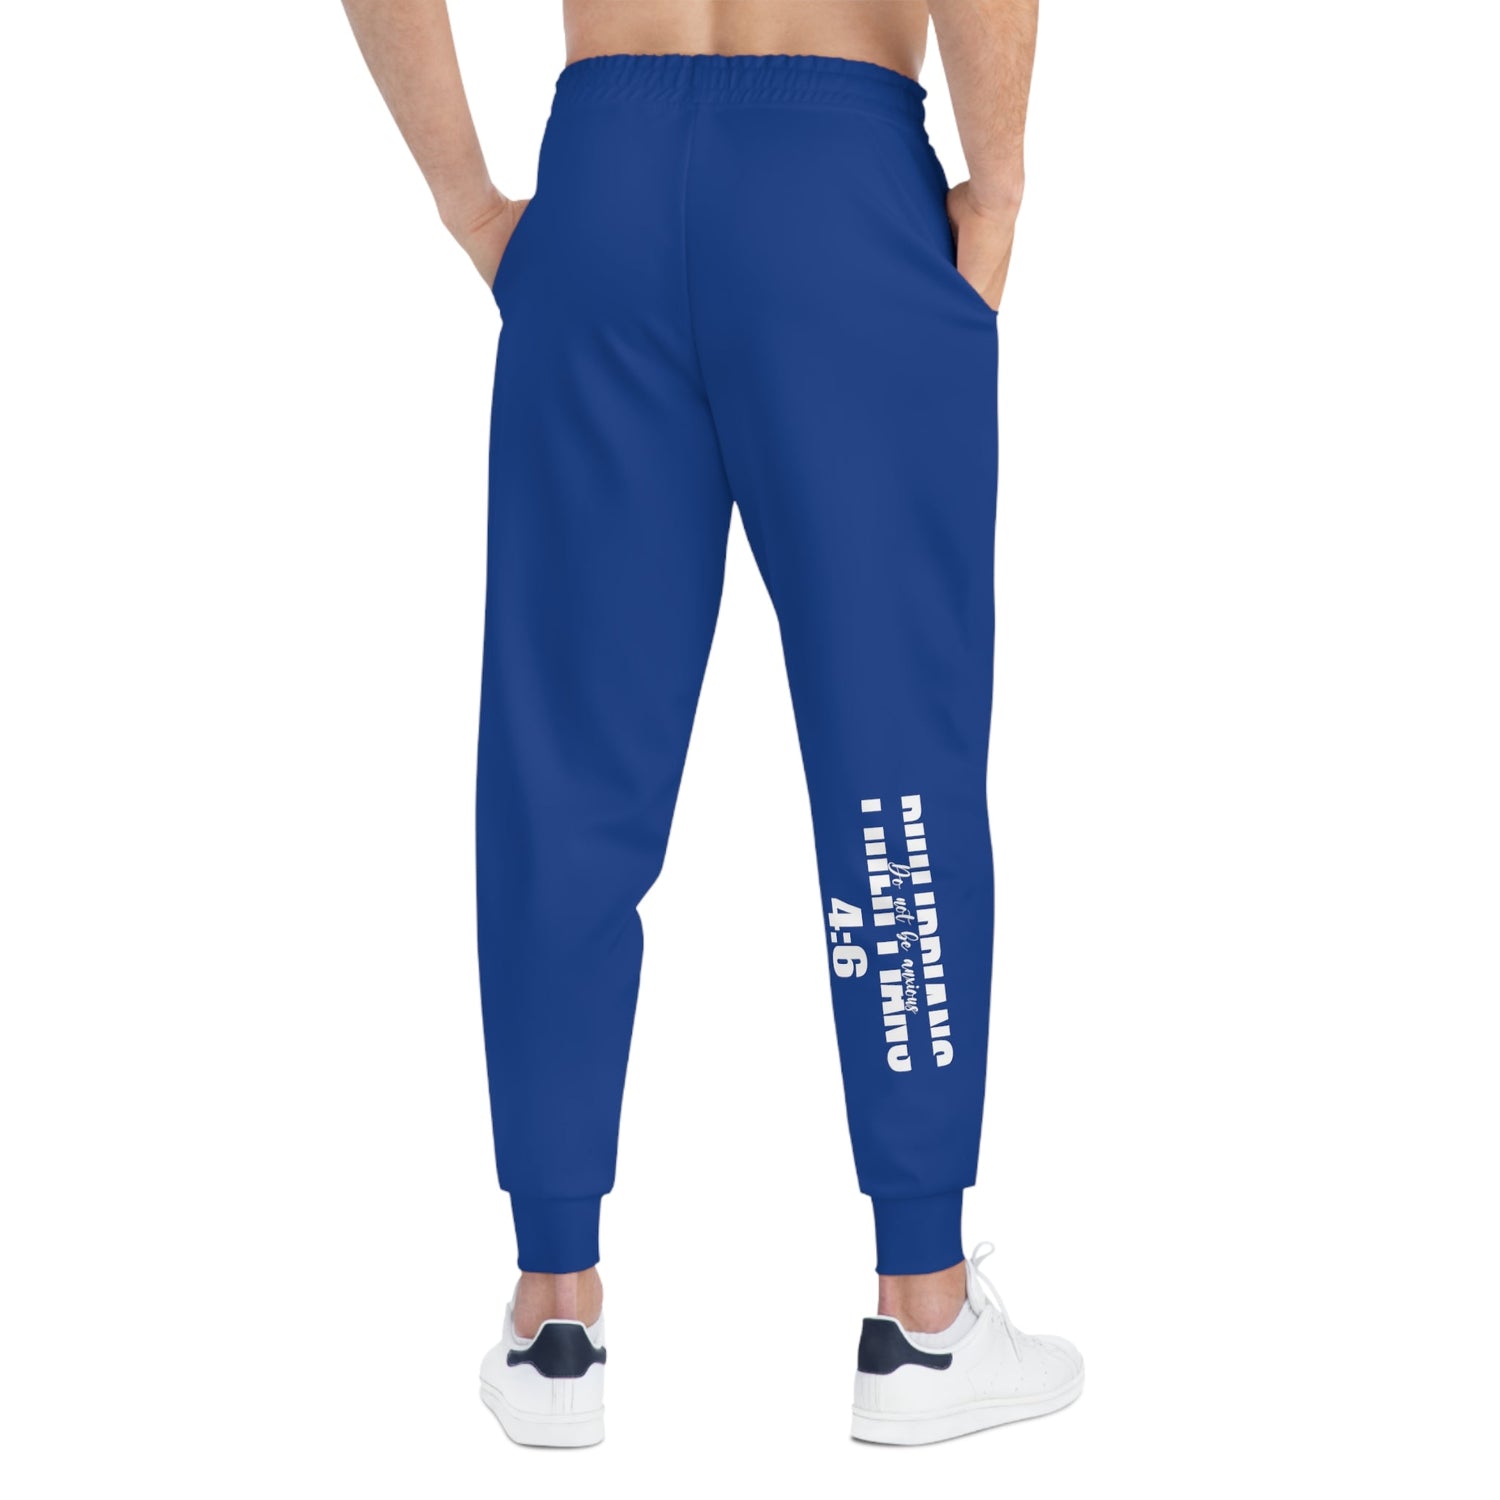 Do Not be Anxious Blue Unisex Athletic Joggers-All Over Prints-Wear What Inspires You